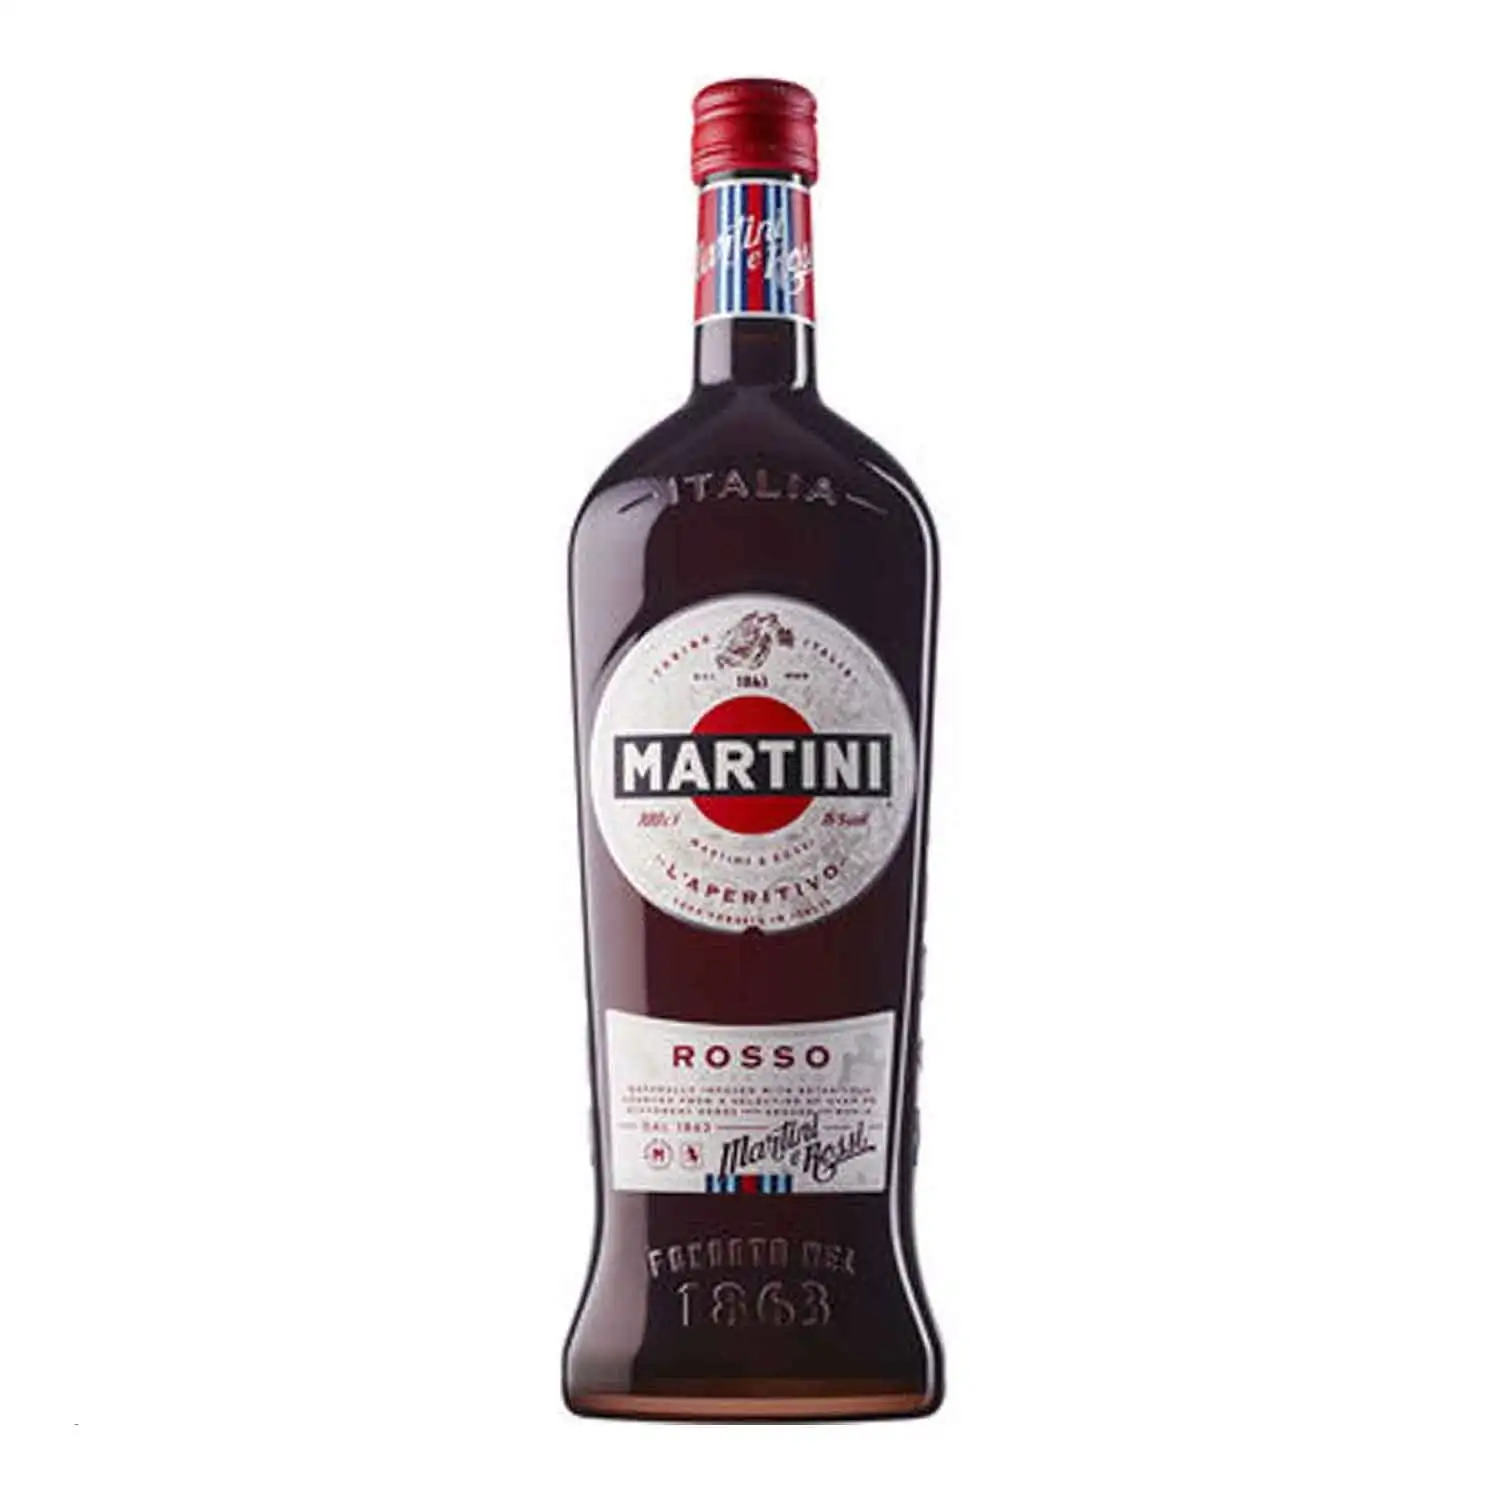 Martini rosso 75cl Alc 15% - Buy at Real Tobacco